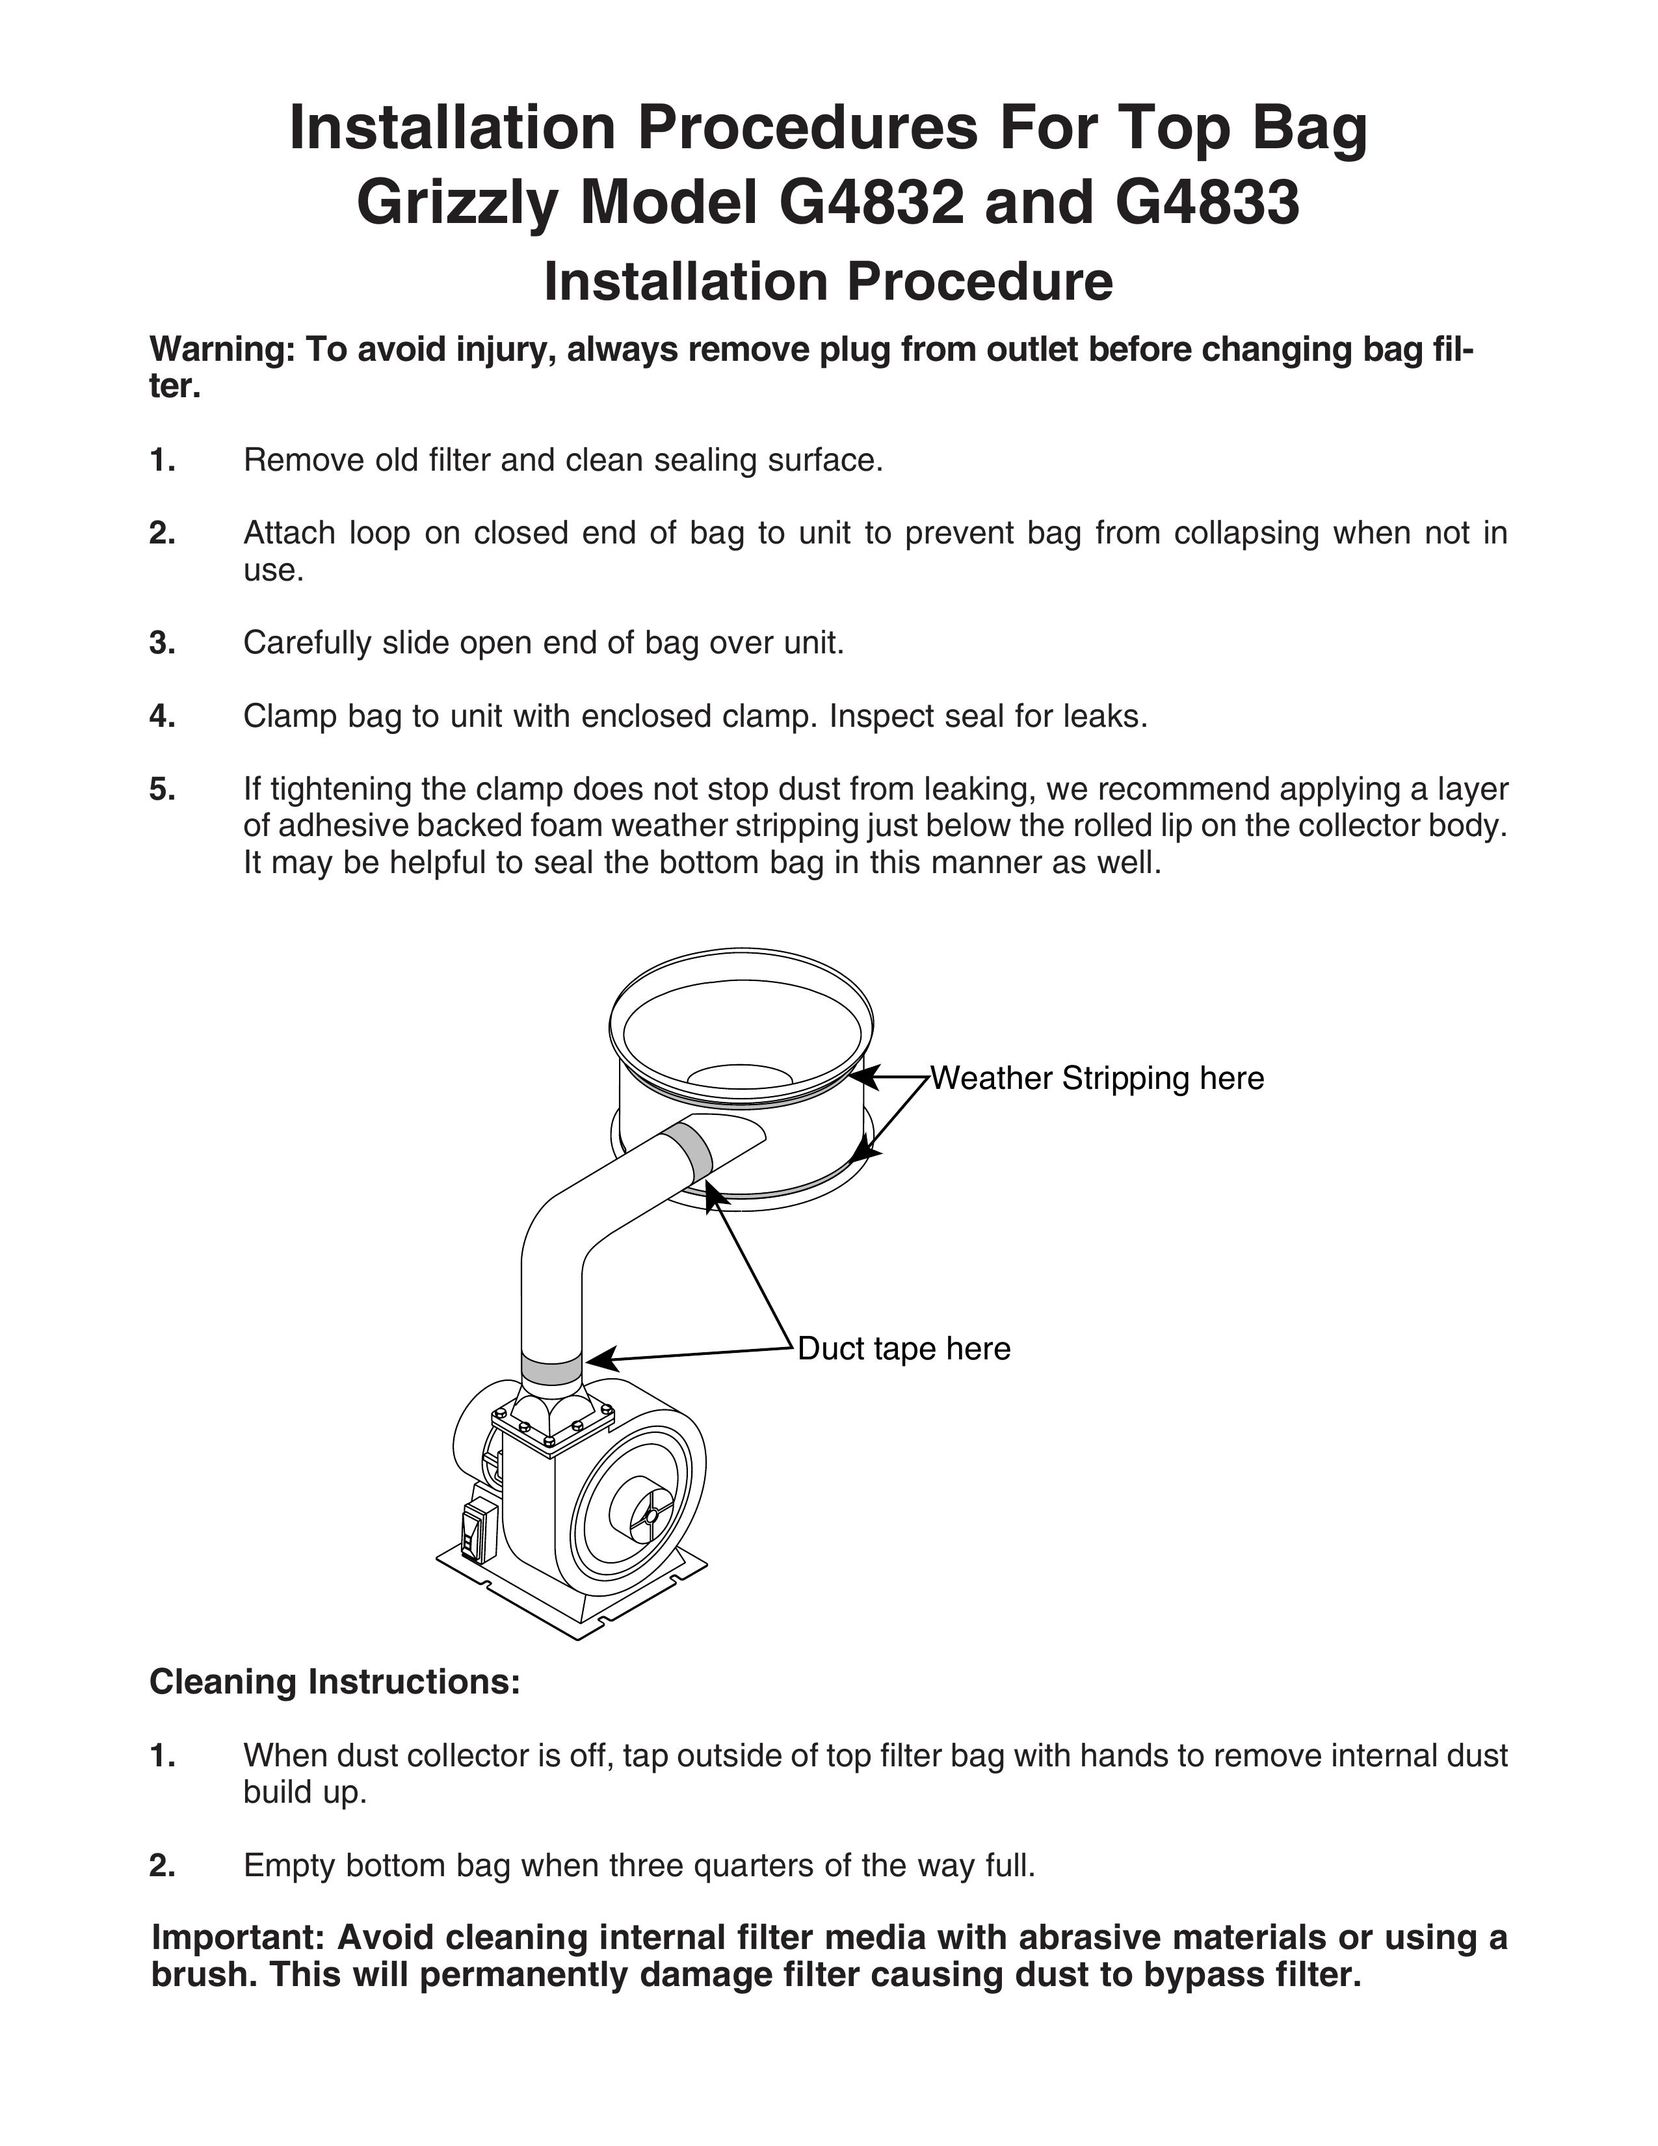 Grizzly G4832 Dust Collector User Manual